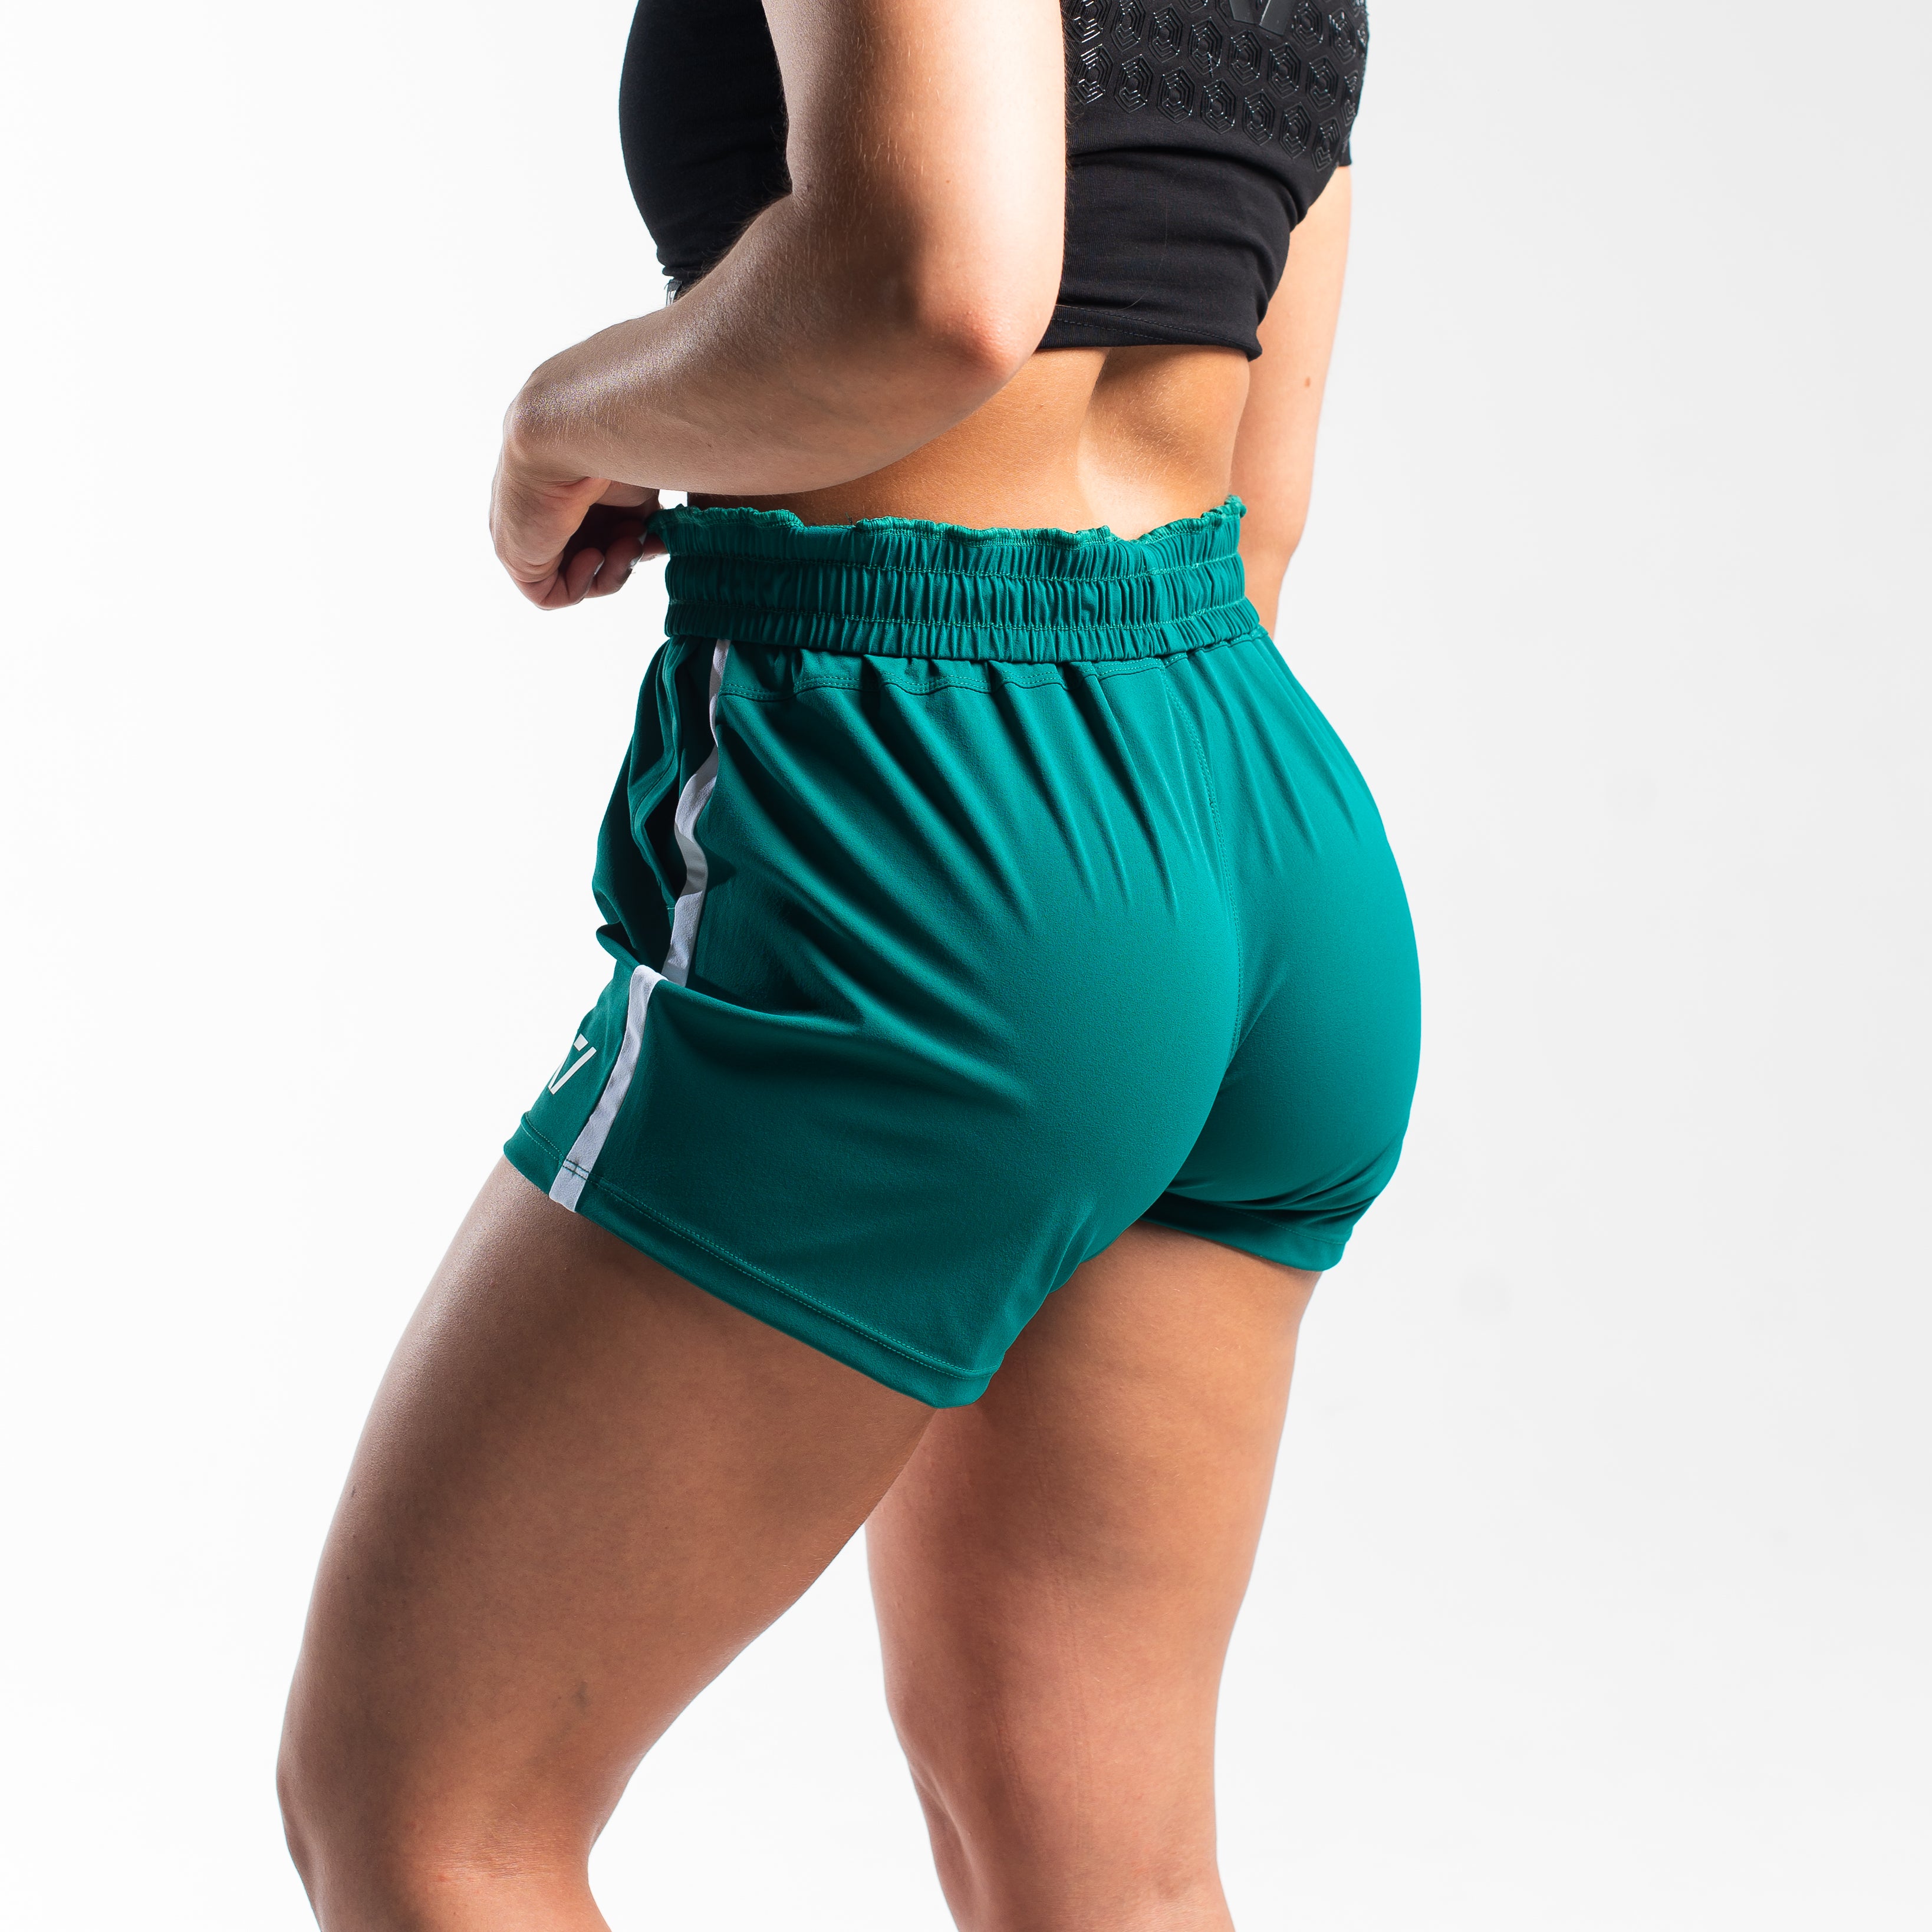 360GO was created to provide the flexibility for all movements in your training while offering comfort. These shorts offer 360 degrees of stretch in all angles and allow you to remain comfortable without limiting any movement in both training and life environments. Designed with a wide drawstring to easily adjust your waist without slipping. Purchase 360GO KWD Squat Shorts from A7 UK. All A7 Powerlifting Equipment shipping to UK, Norway, Switzerland and Iceland.